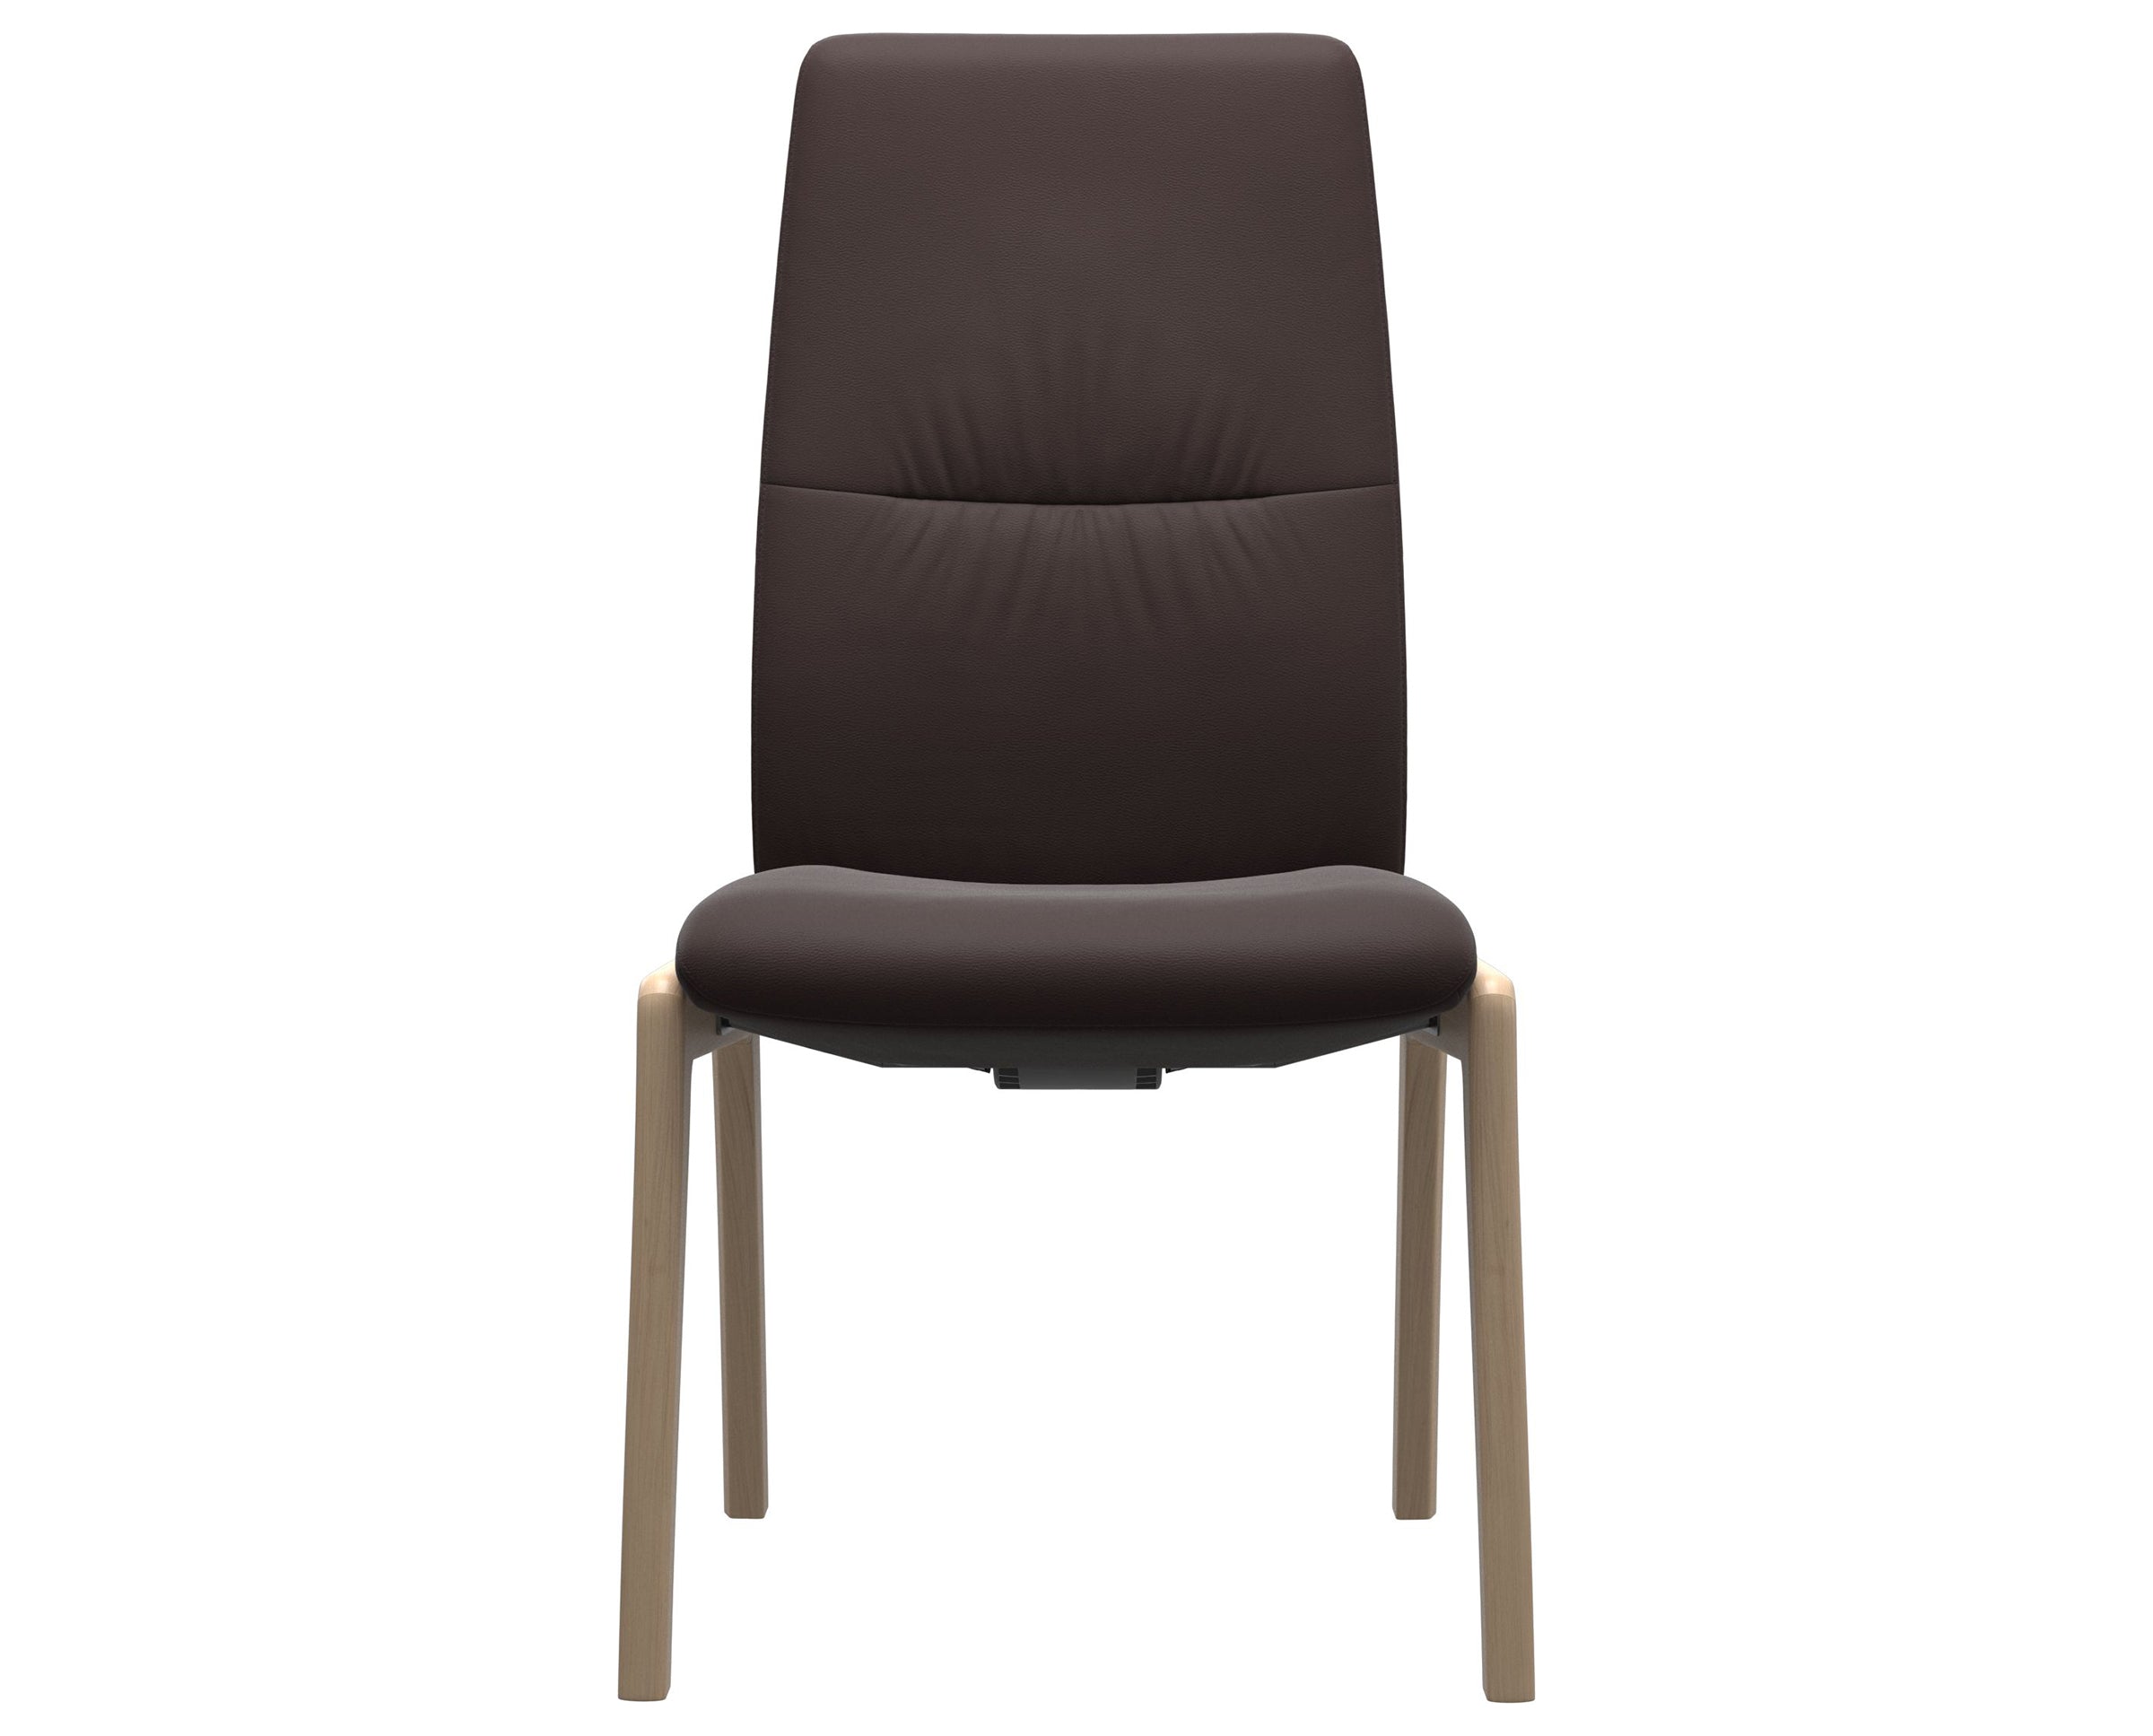 Paloma Leather Chocolate and Natural Base | Stressless Mint High Back D100 Dining Chair | Valley Ridge Furniture